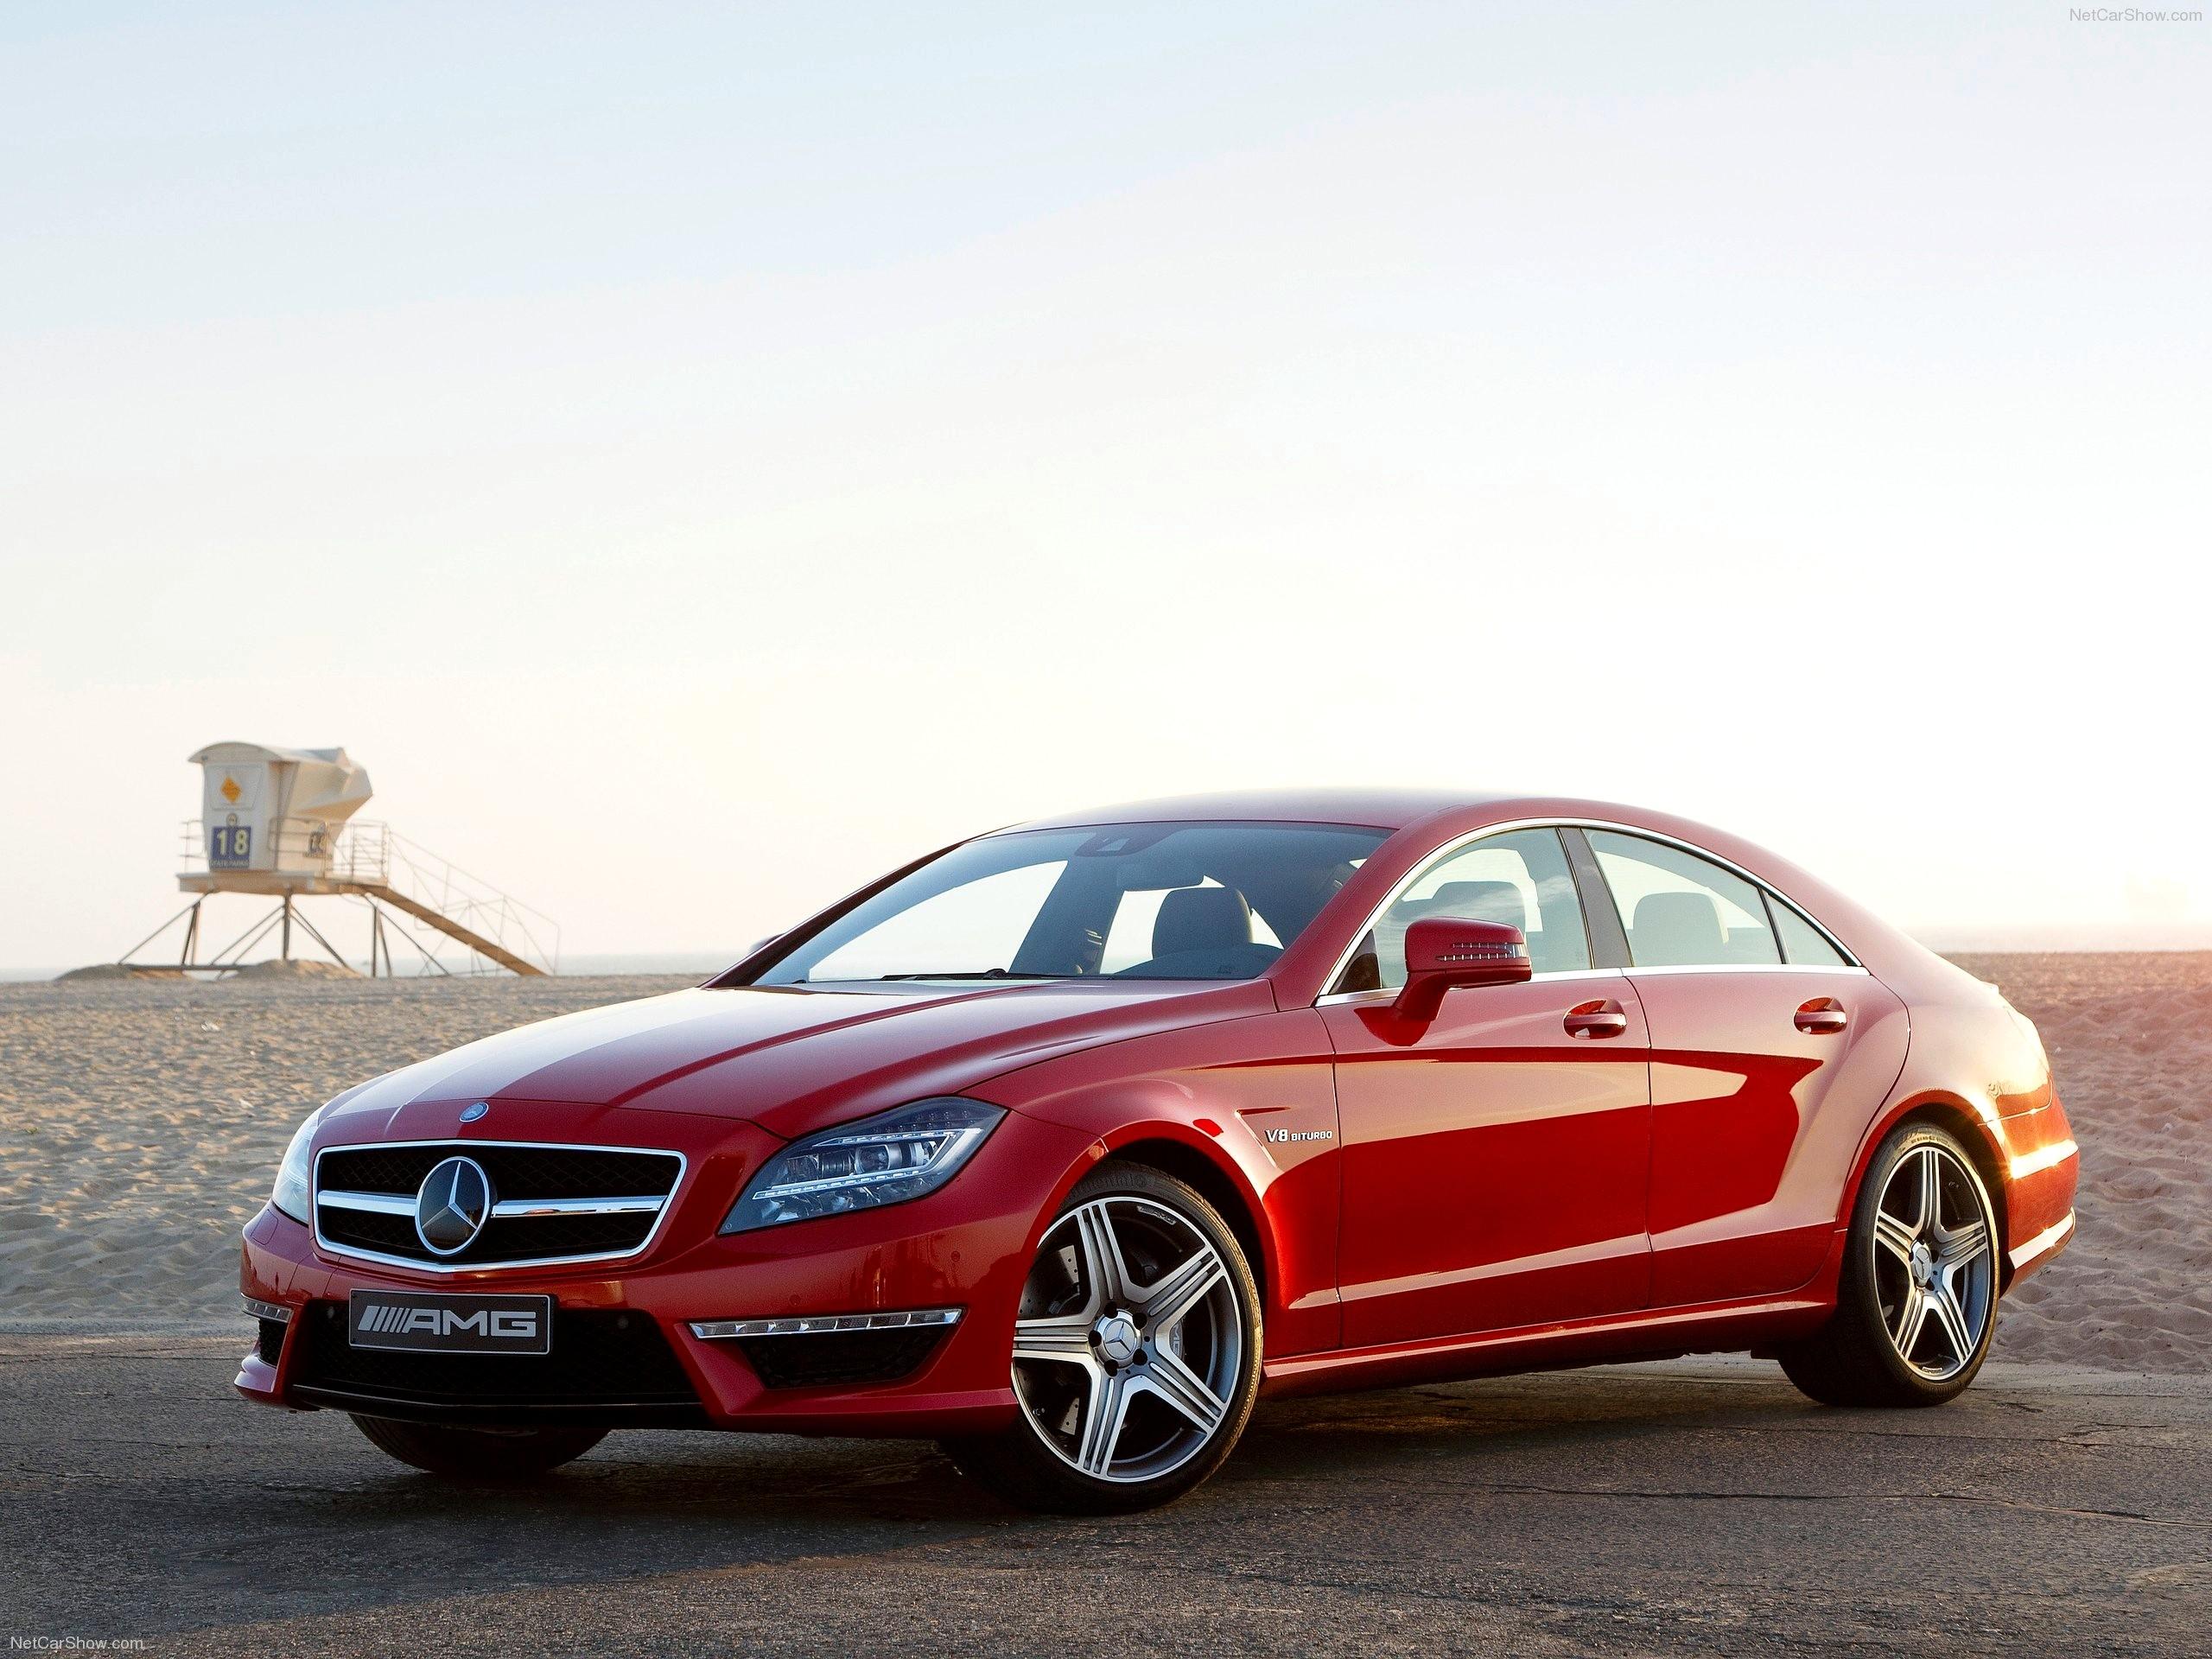 Mercedes Benz Cls 63 Amg Wallpapers Hd Quality - Mercedes Benz Cls63 2012 - HD Wallpaper 